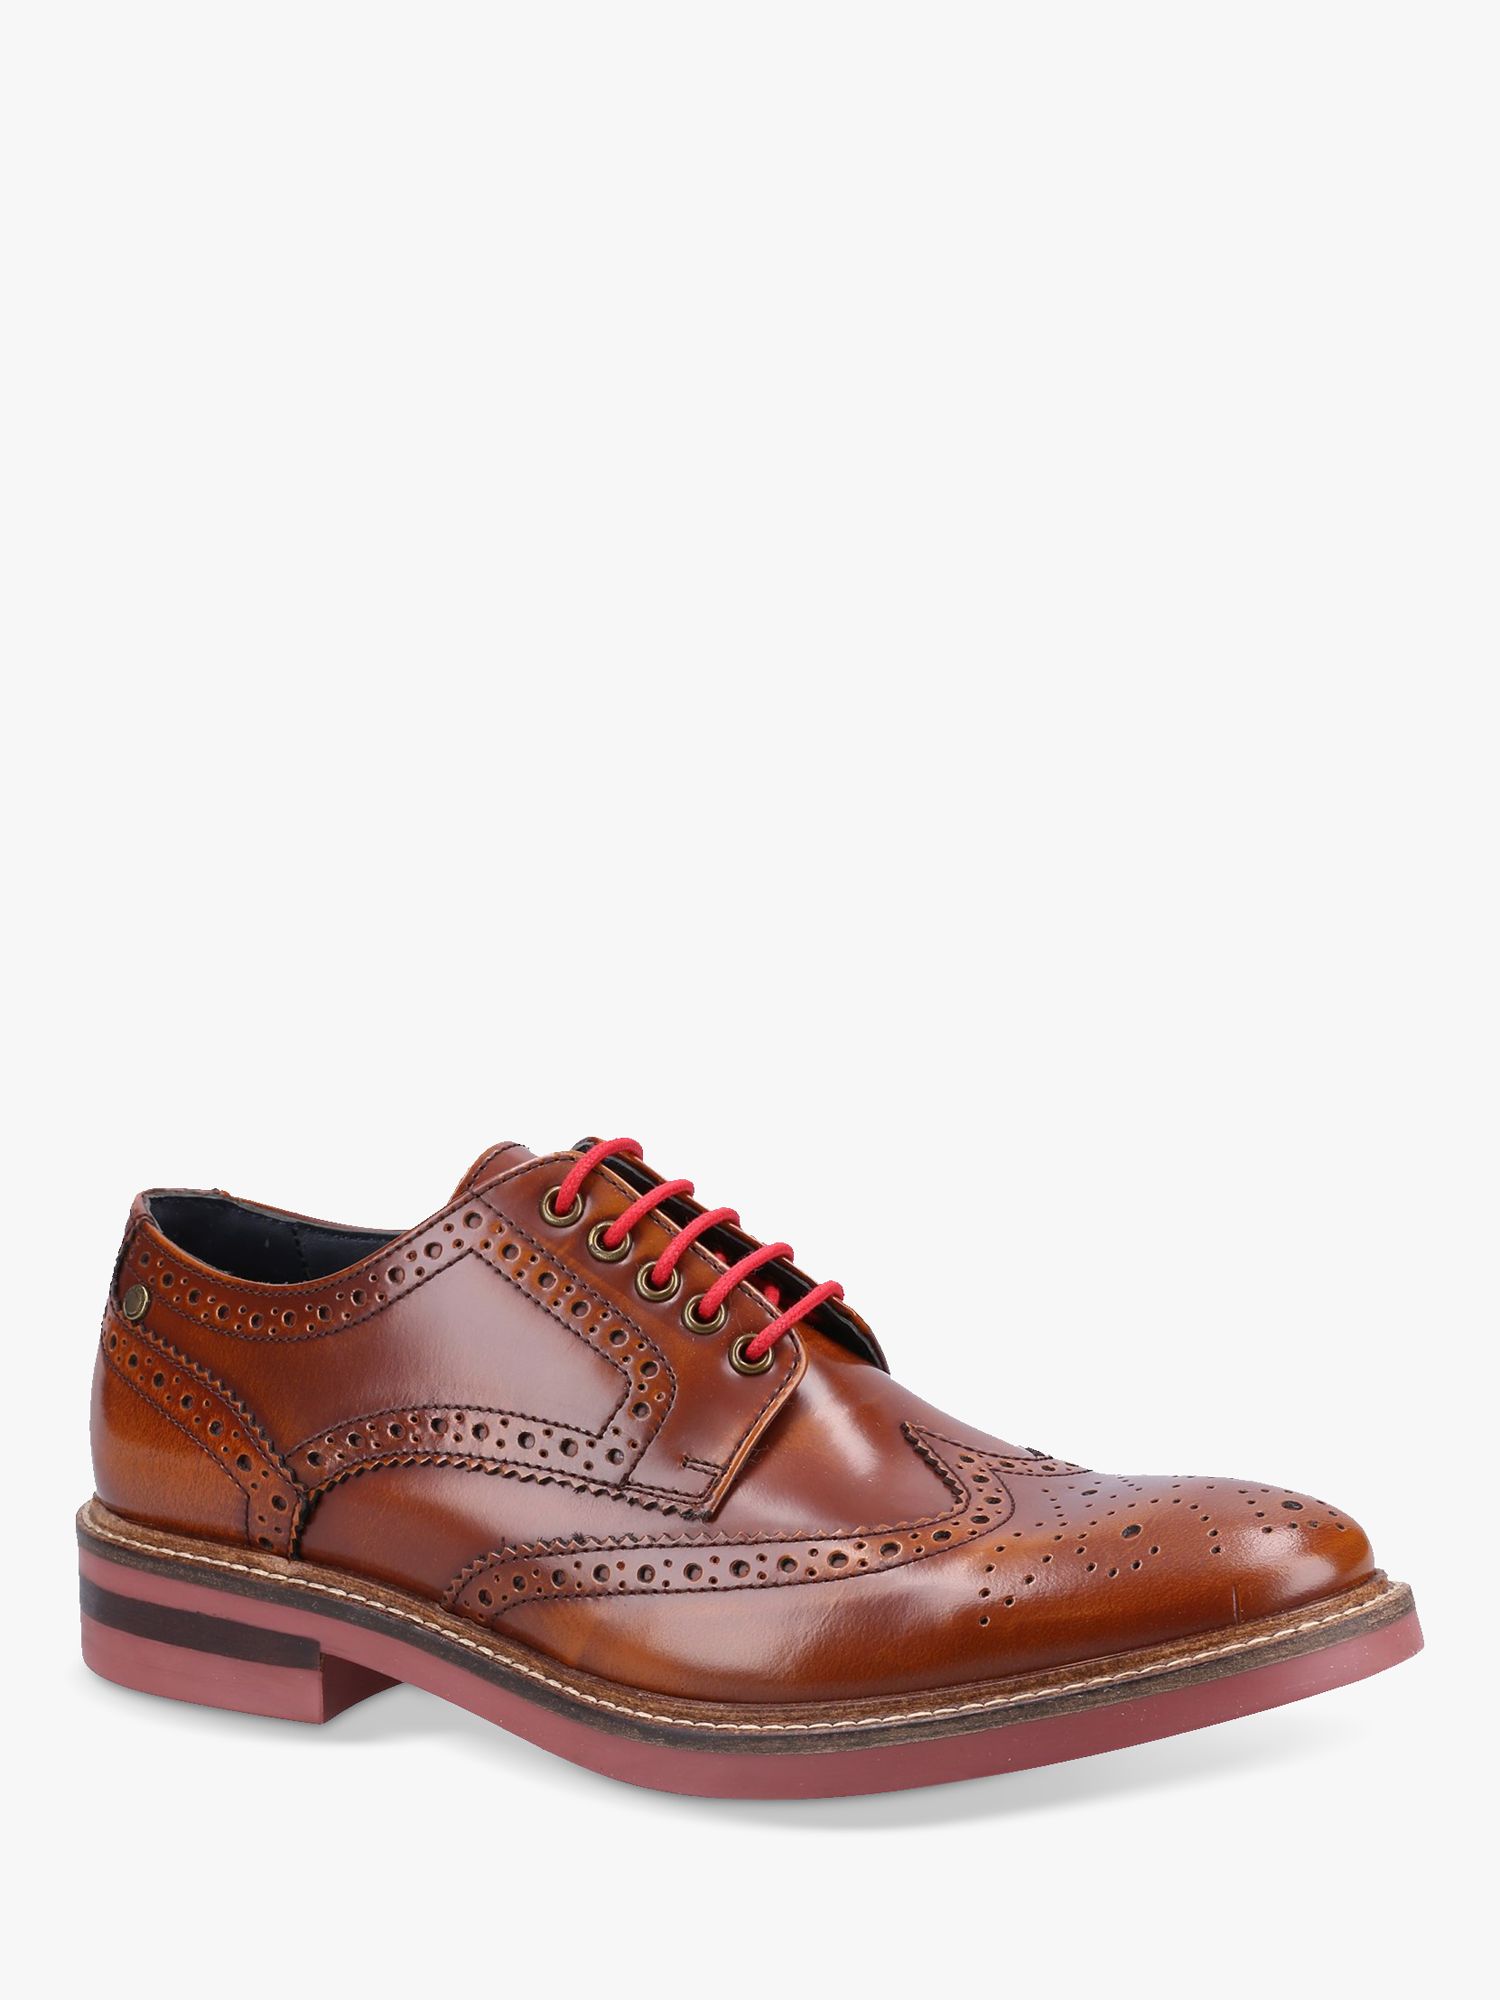 Buy Base London Woburn Leather Derby Shoes, Tan Online at johnlewis.com